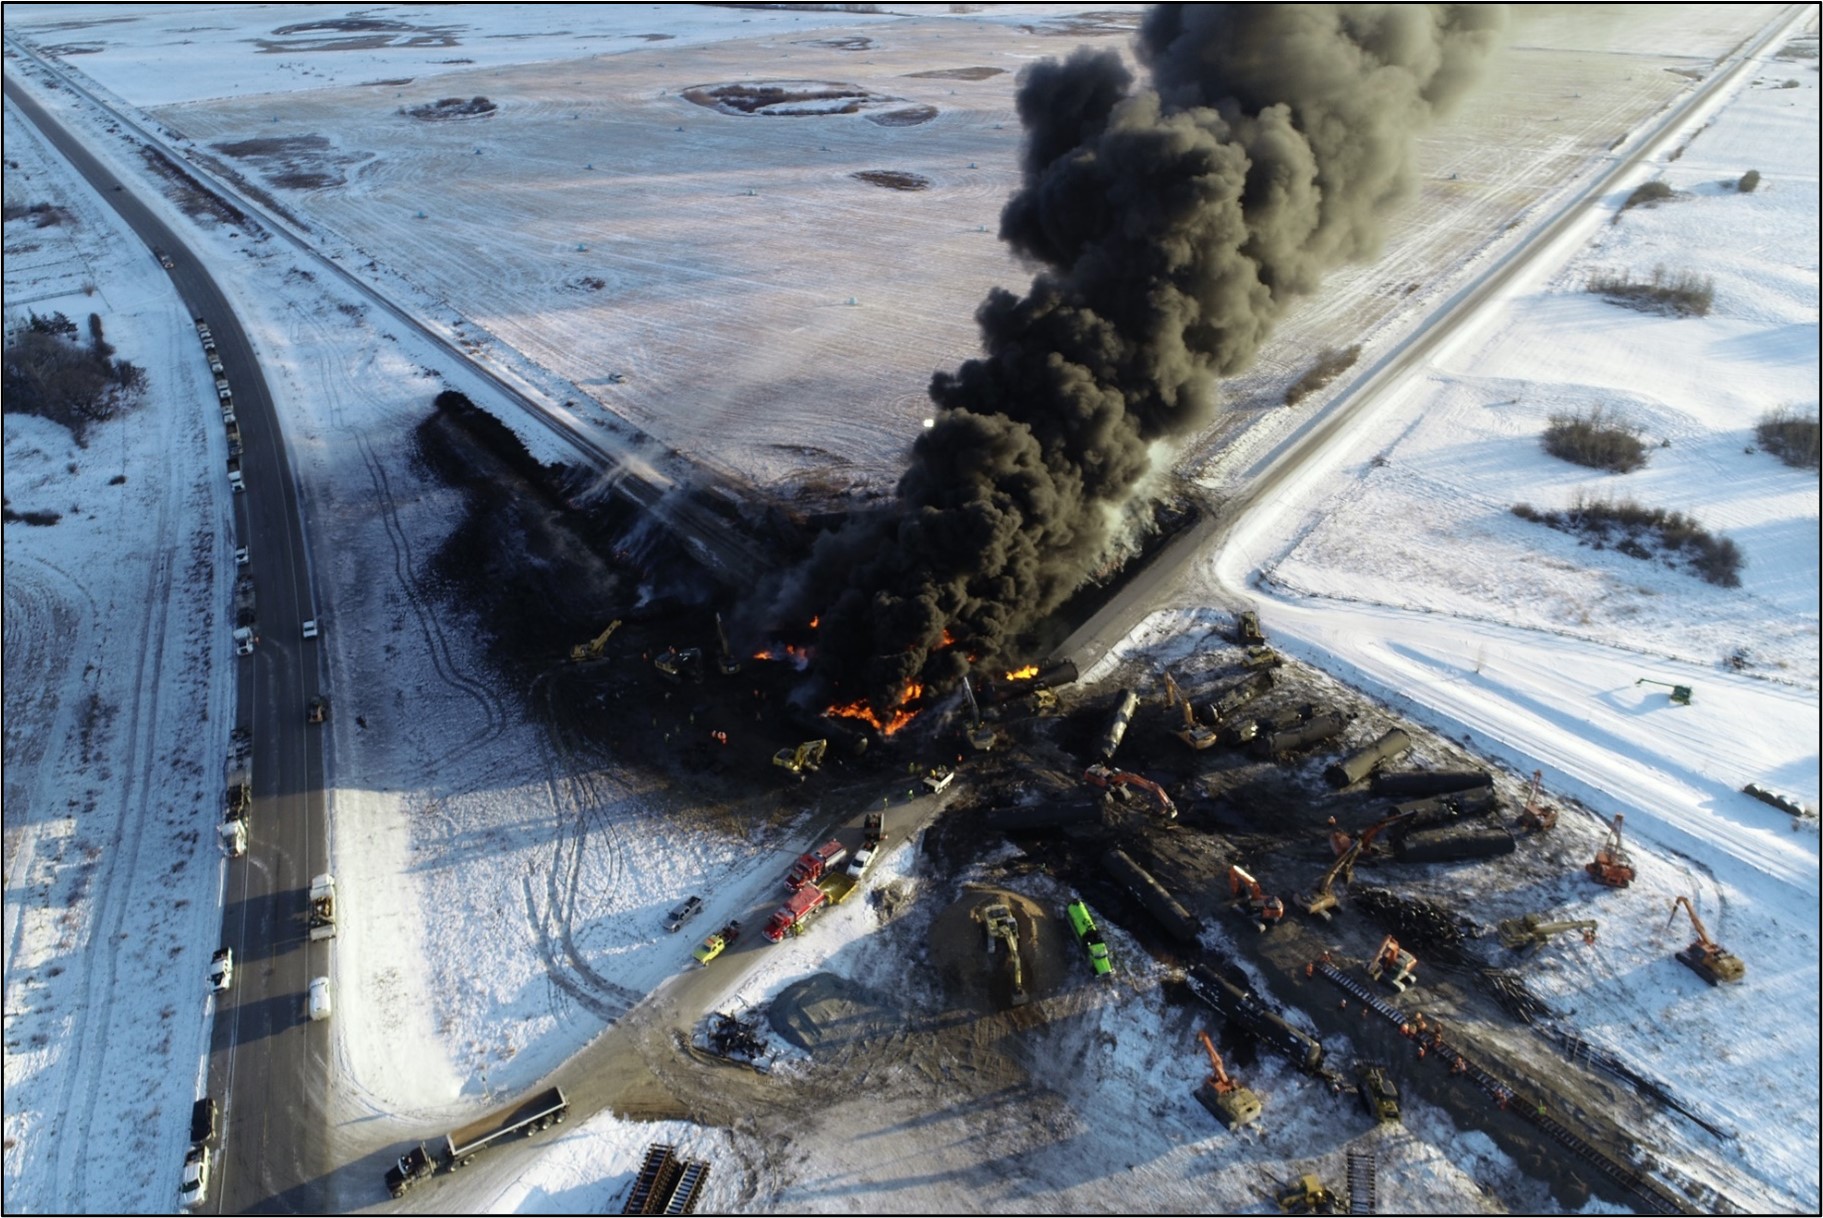 Aerial photo of the derailment site and pool fire, looking east, taken on 09 December 2022 (Source: Canadian Pacific)